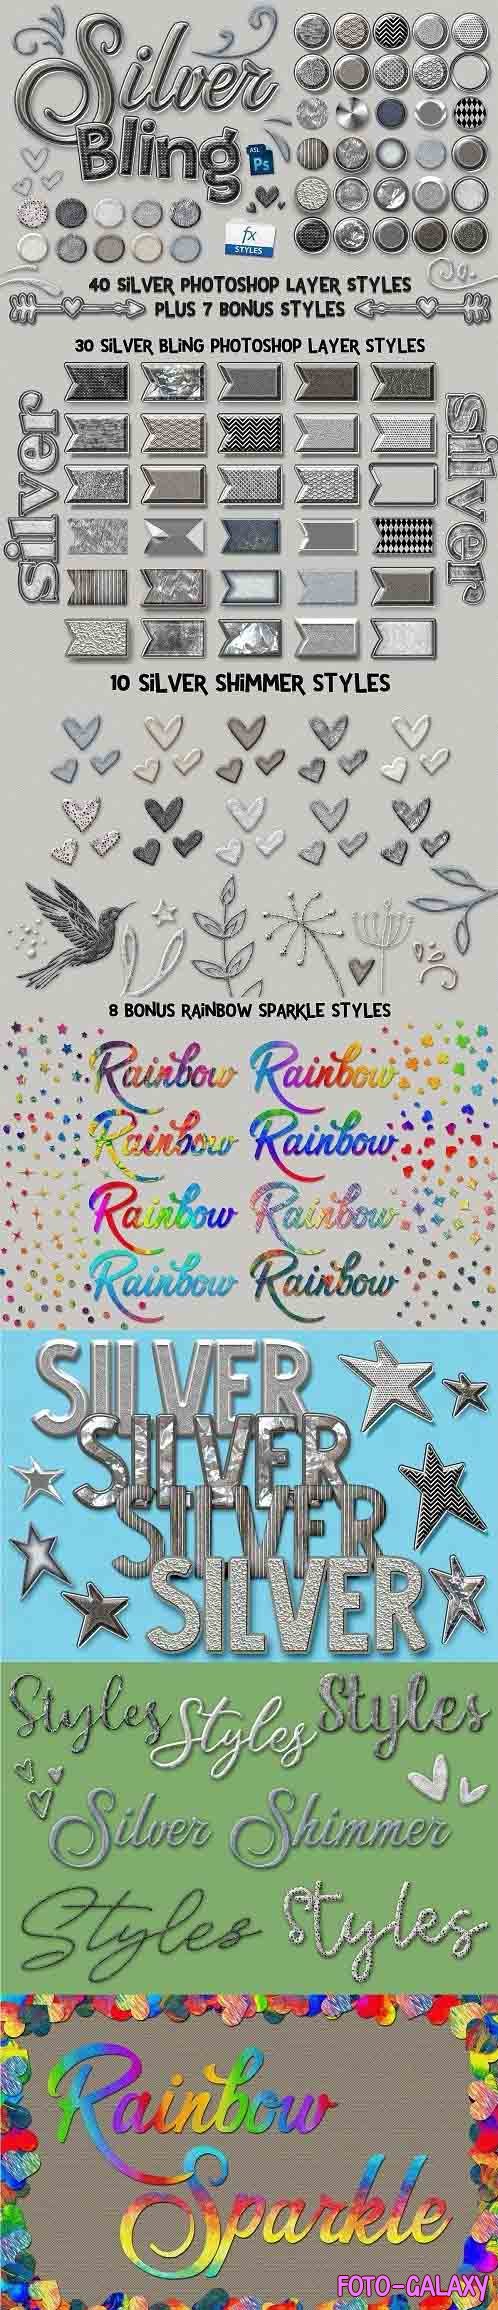 CreativeMarket - Silver Bling Photoshop Layer Styles 5115002